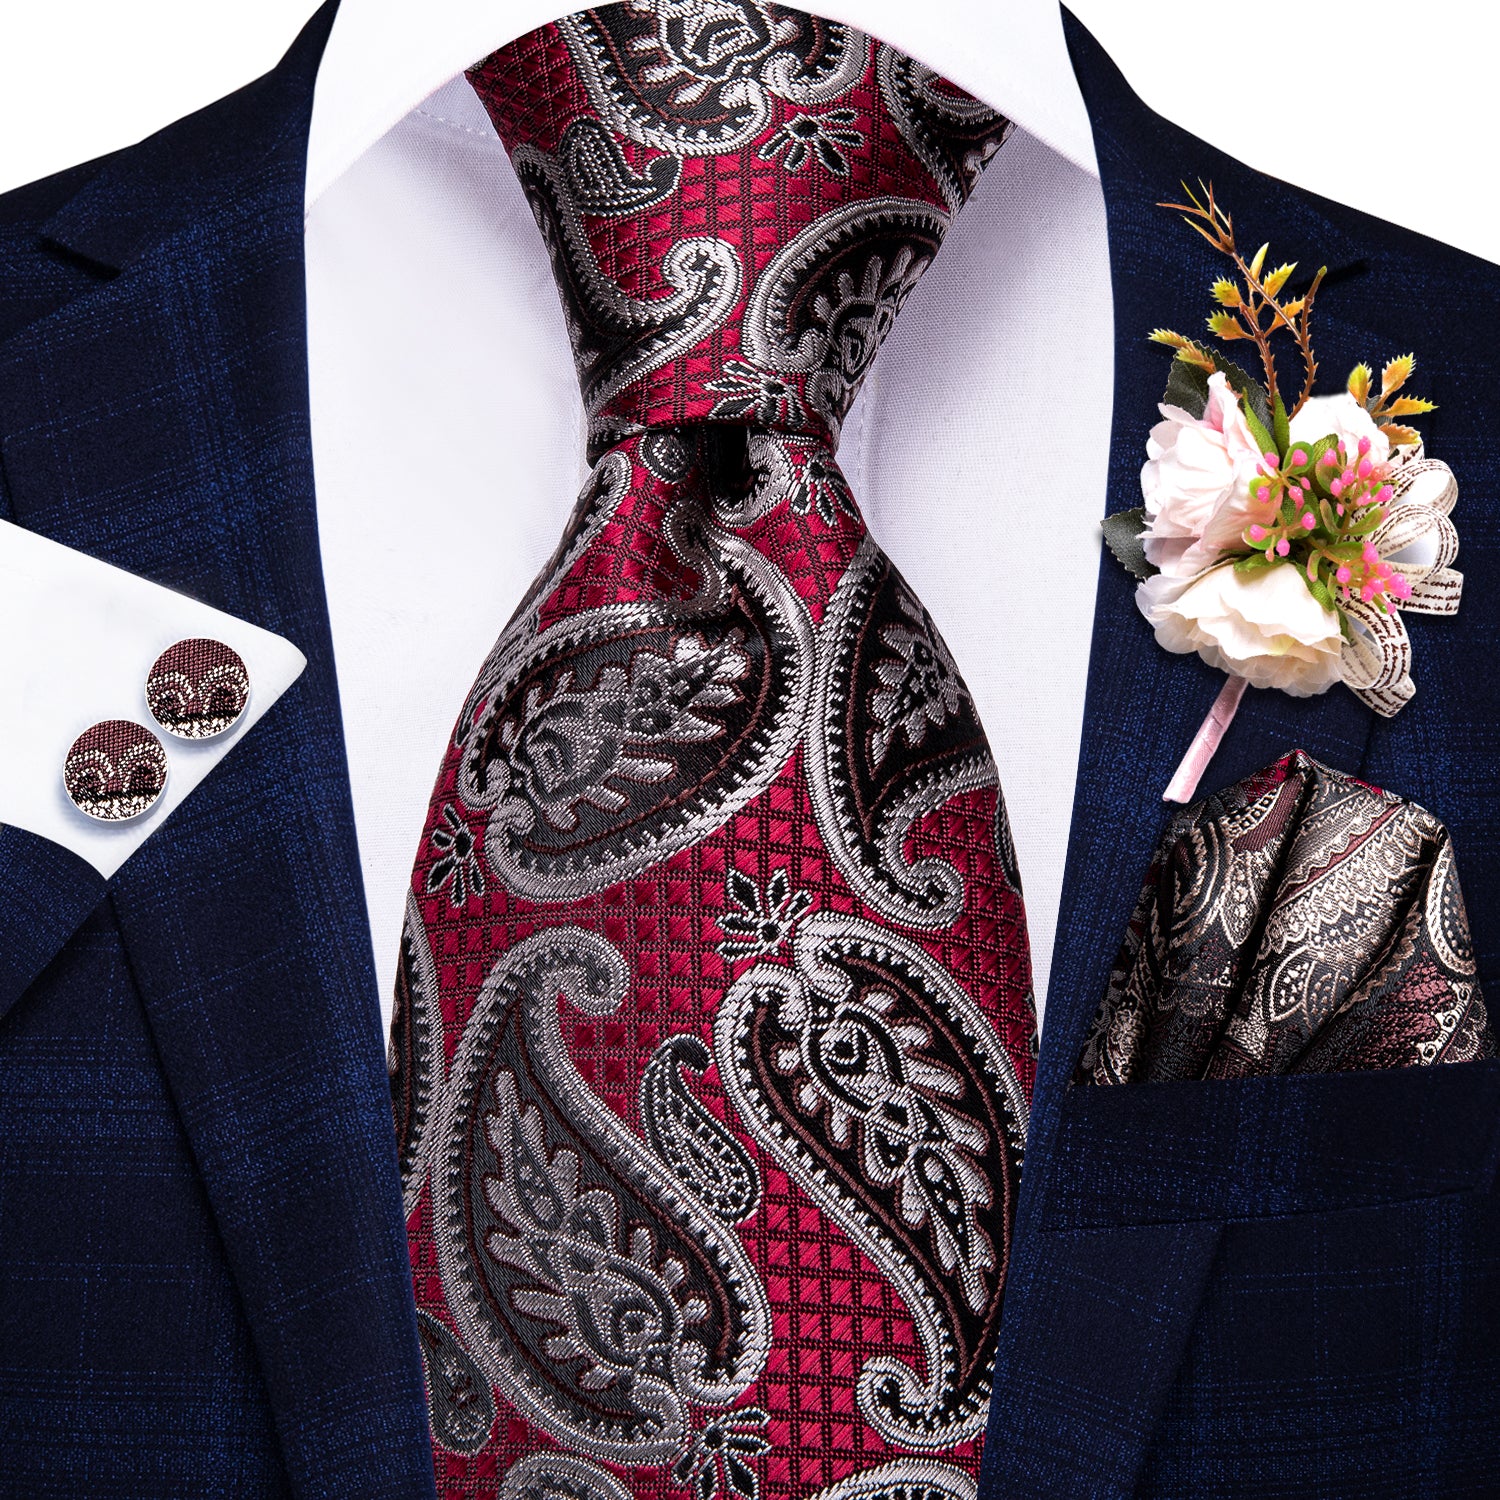 Red Brown Paisley Tie Pocket Square Cufflinks Set with Wedding Brooch